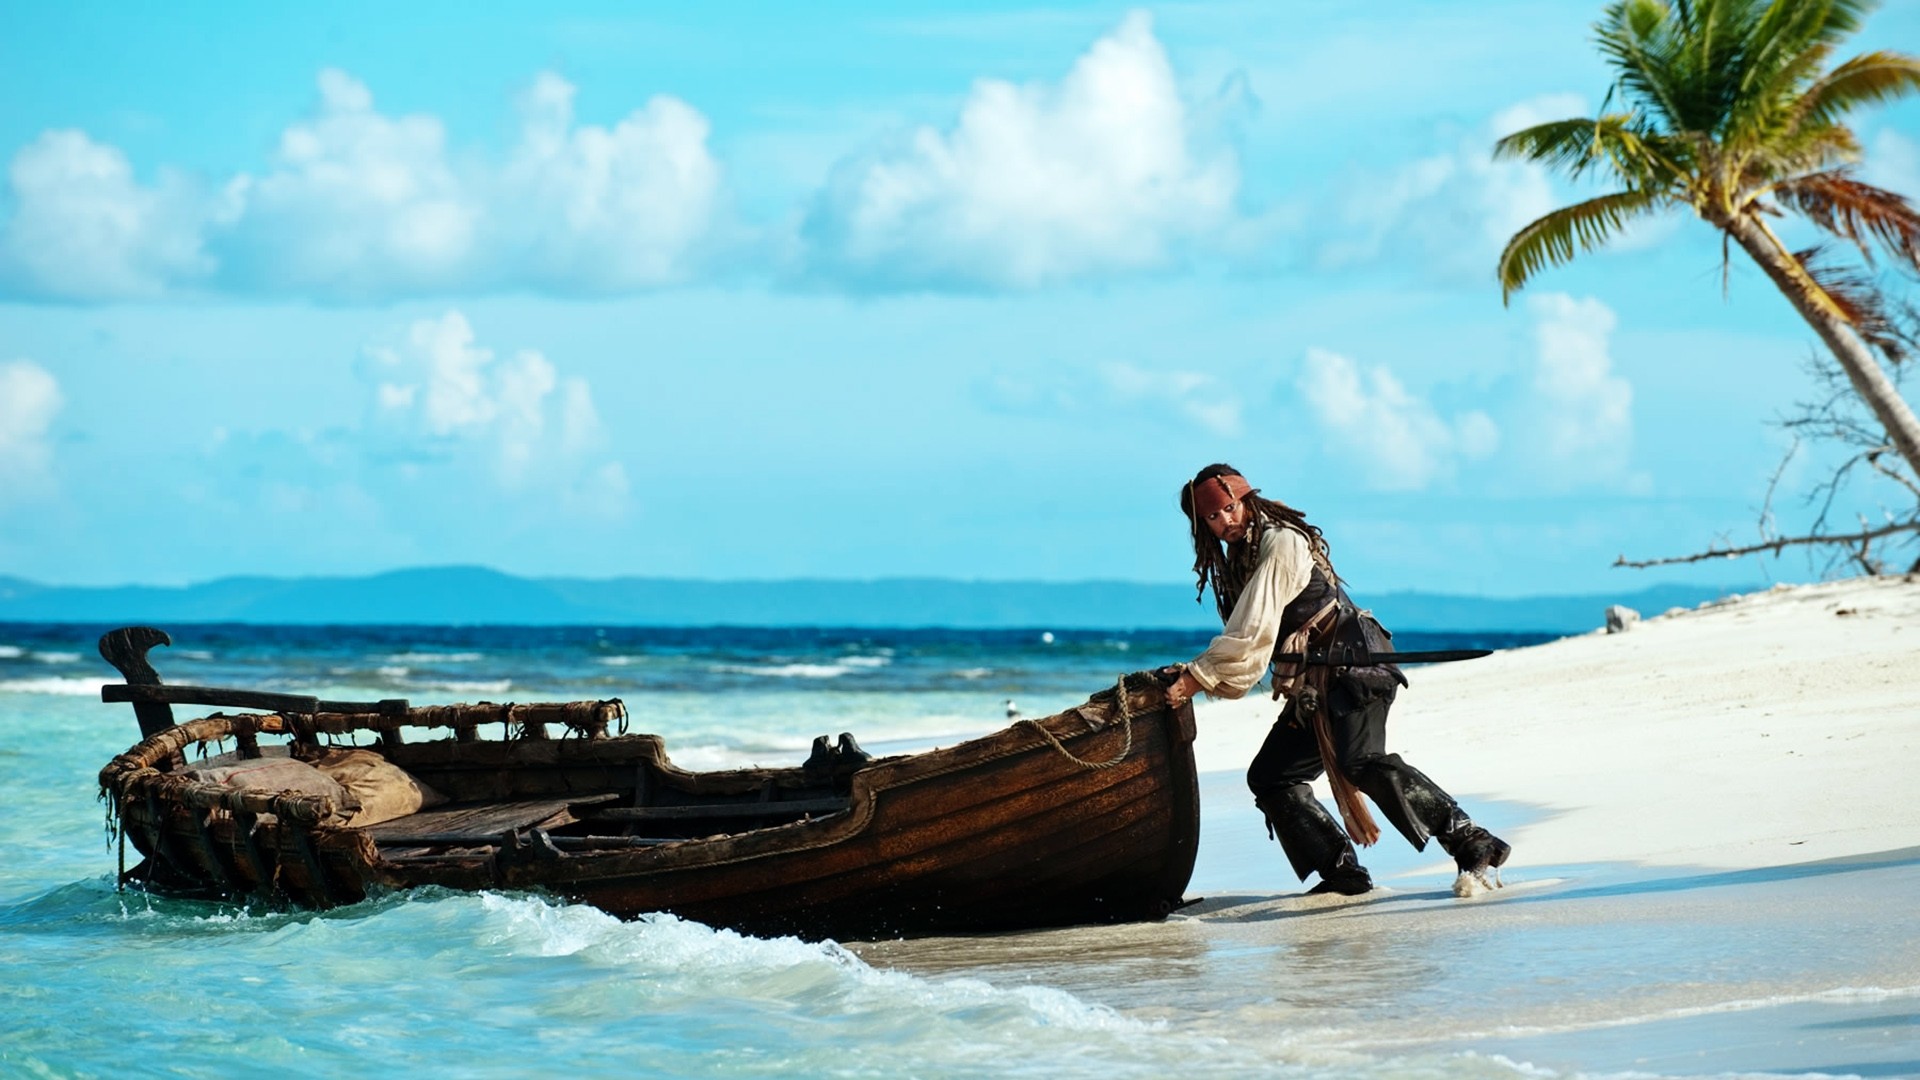 Jack Sparrow With Boat Free Awesome Image For Mobile